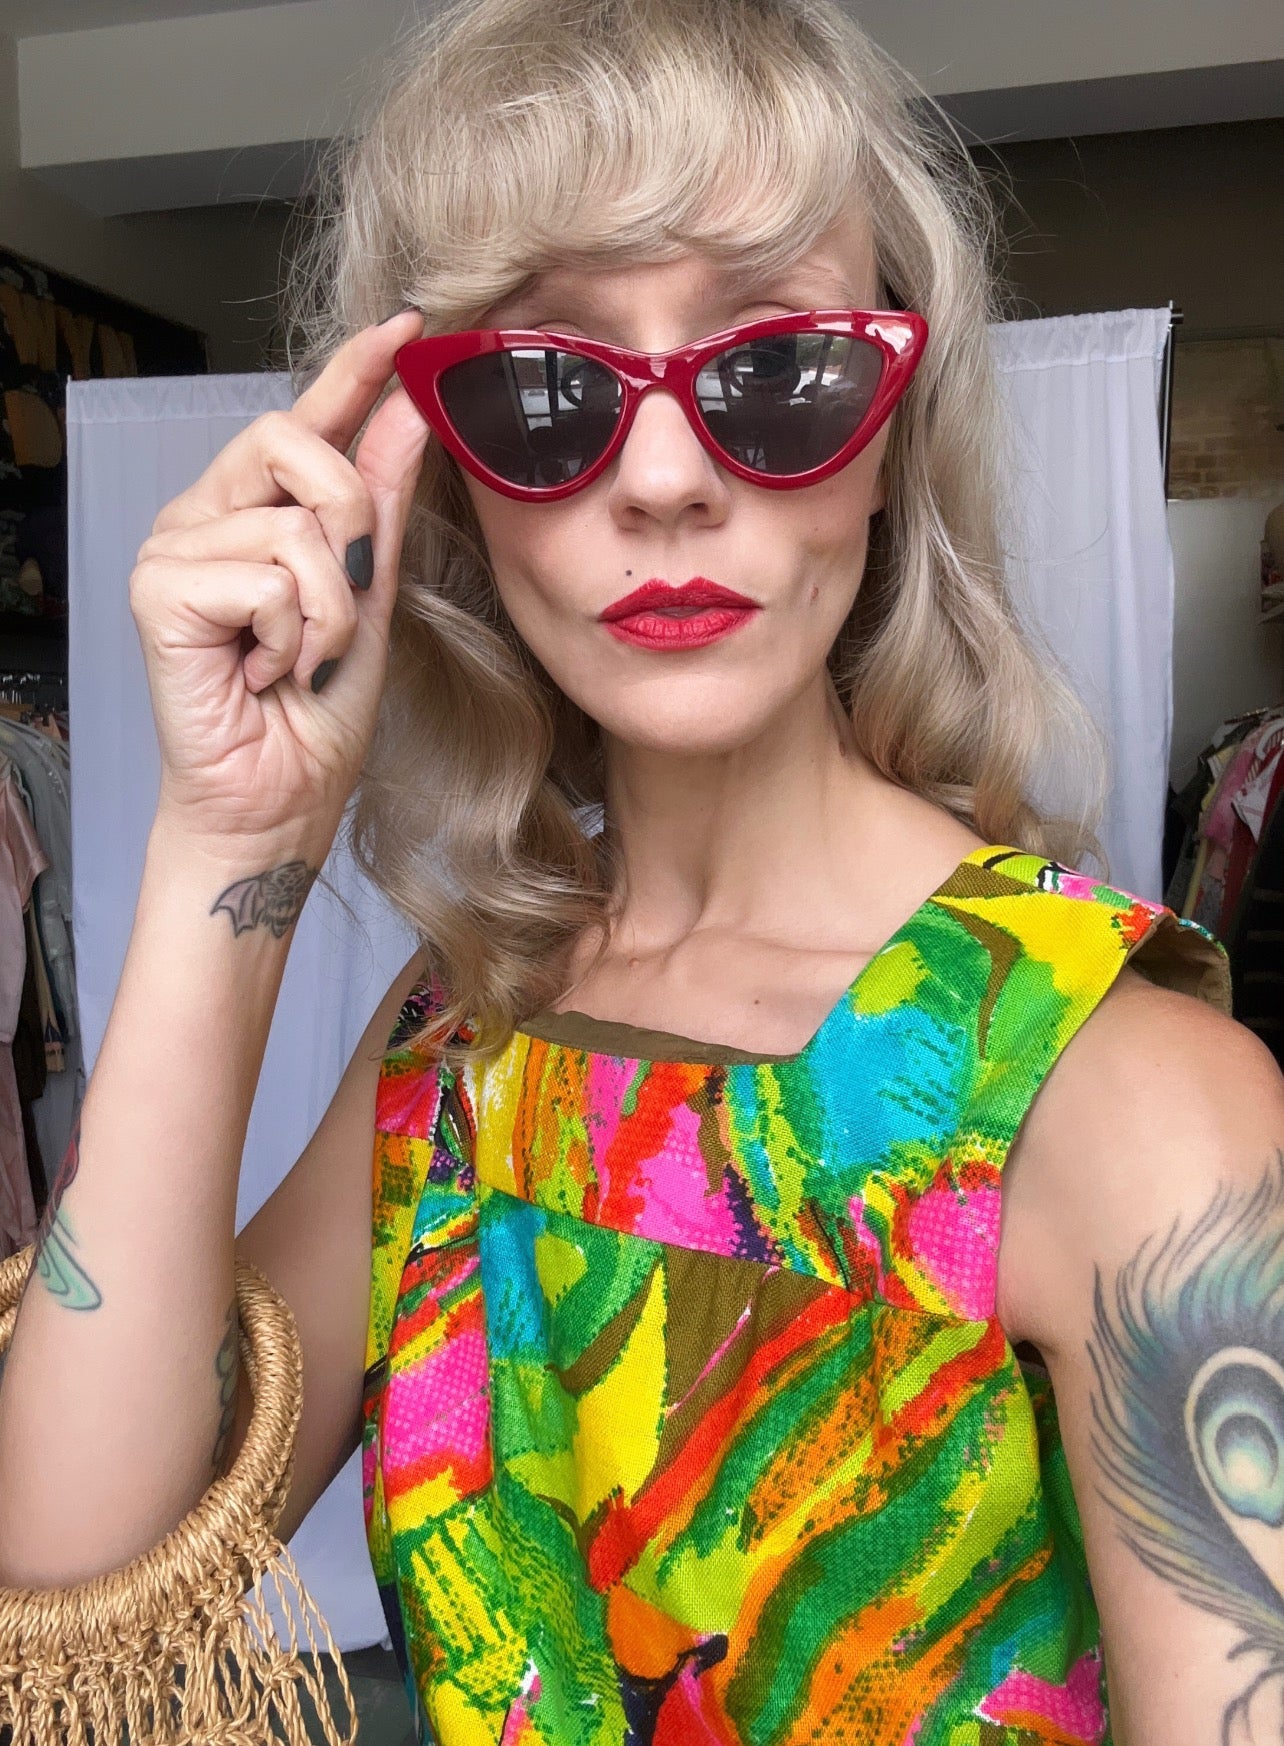 Repro Vintage Inspired 1950s style Maroon Sunglasses